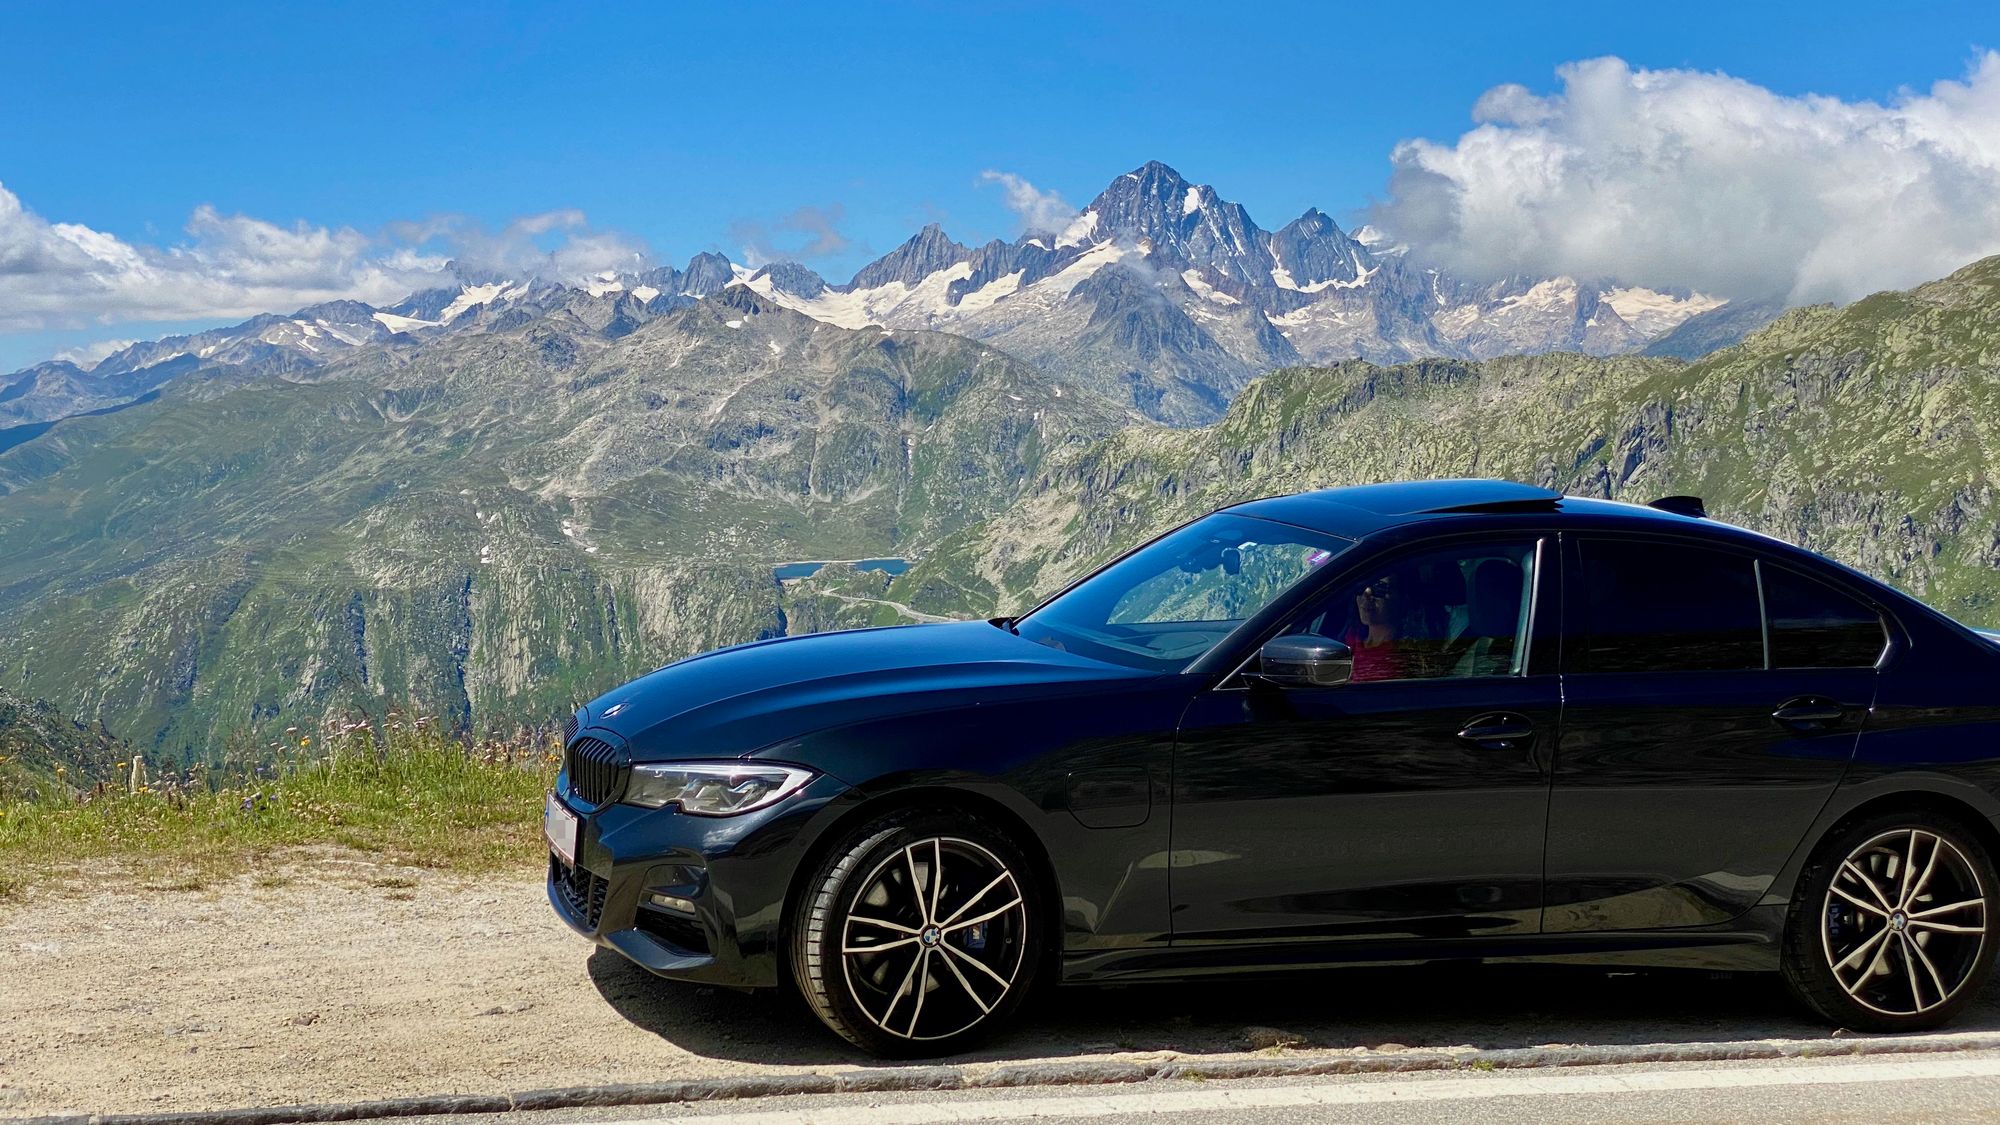 Our car on the edge of the Furka Pass